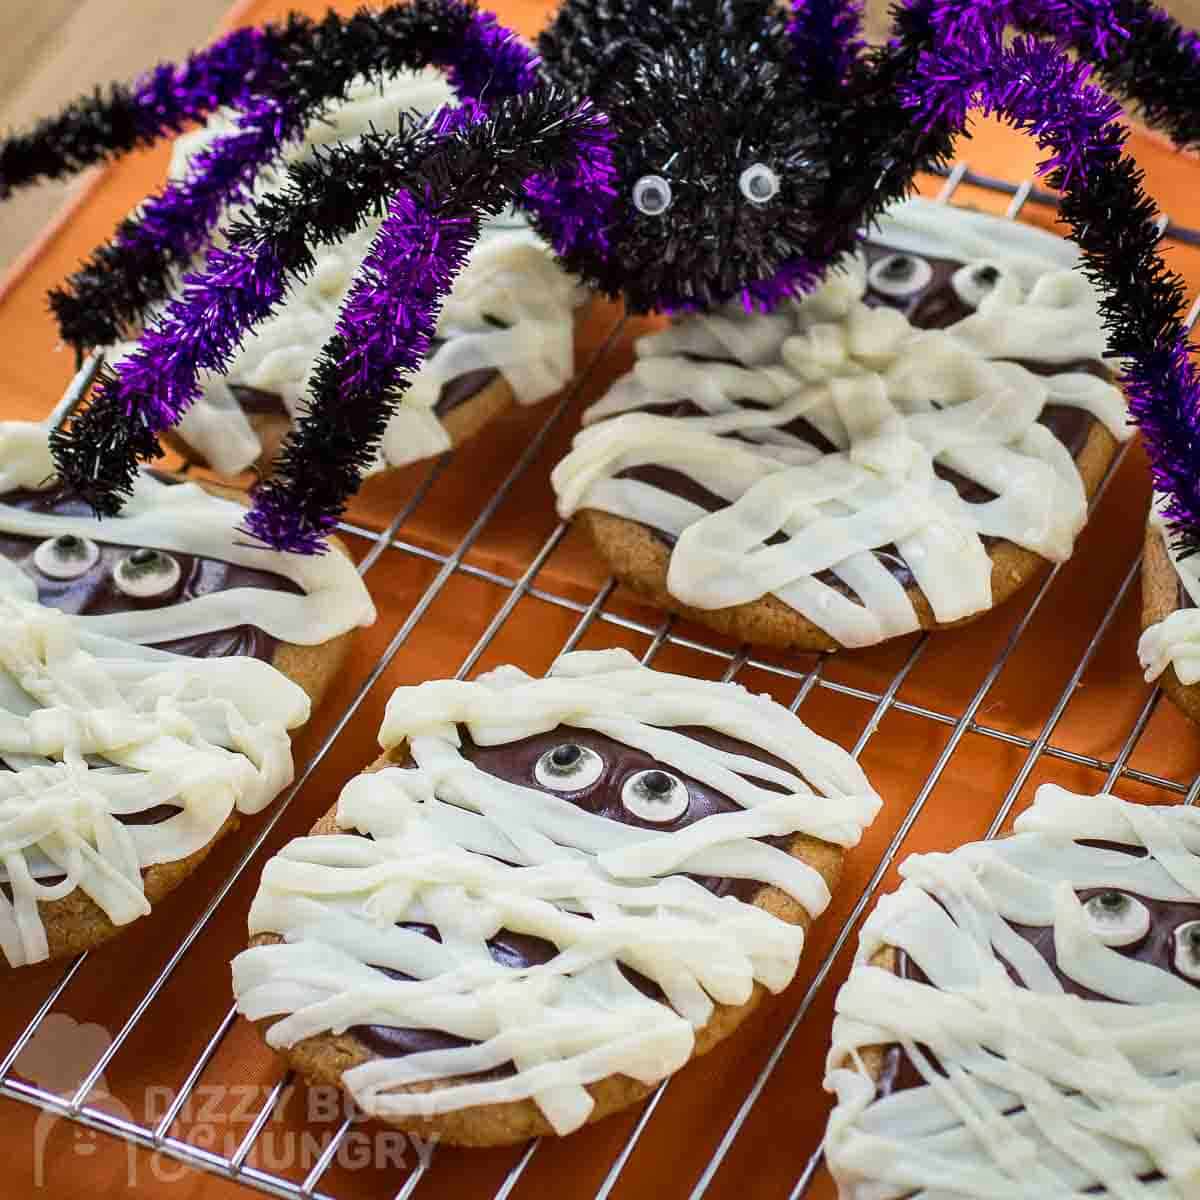 Side angled view of multiple mummy cookies on a cooling rack with a purple and black decorative spider in the background.